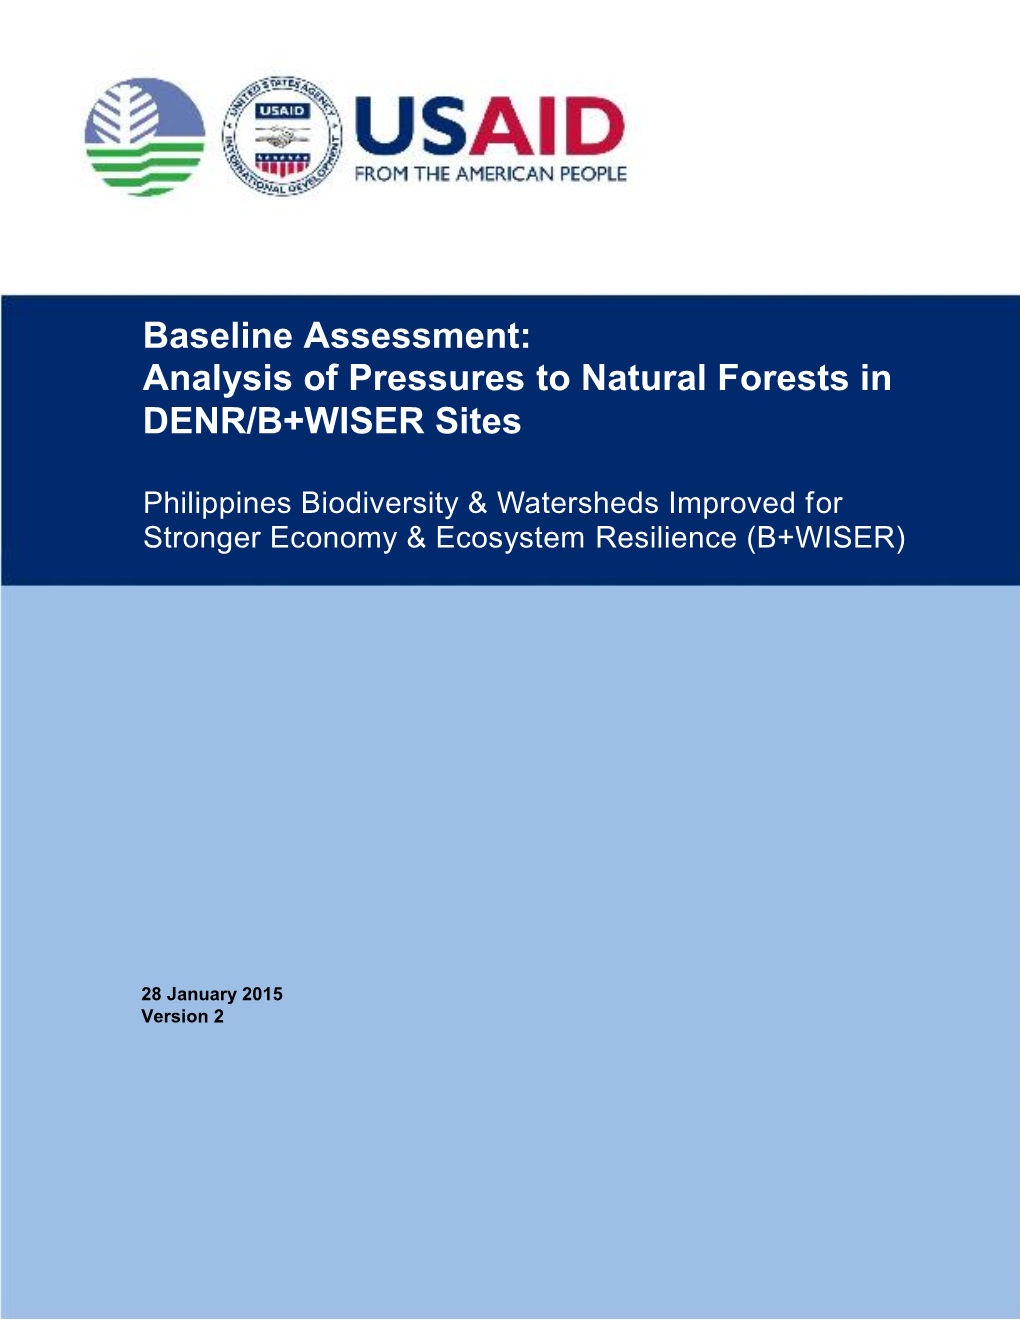 Baseline Assessment: Analysis of Pressures to Natural Forests in DENR/B+WISER Sites